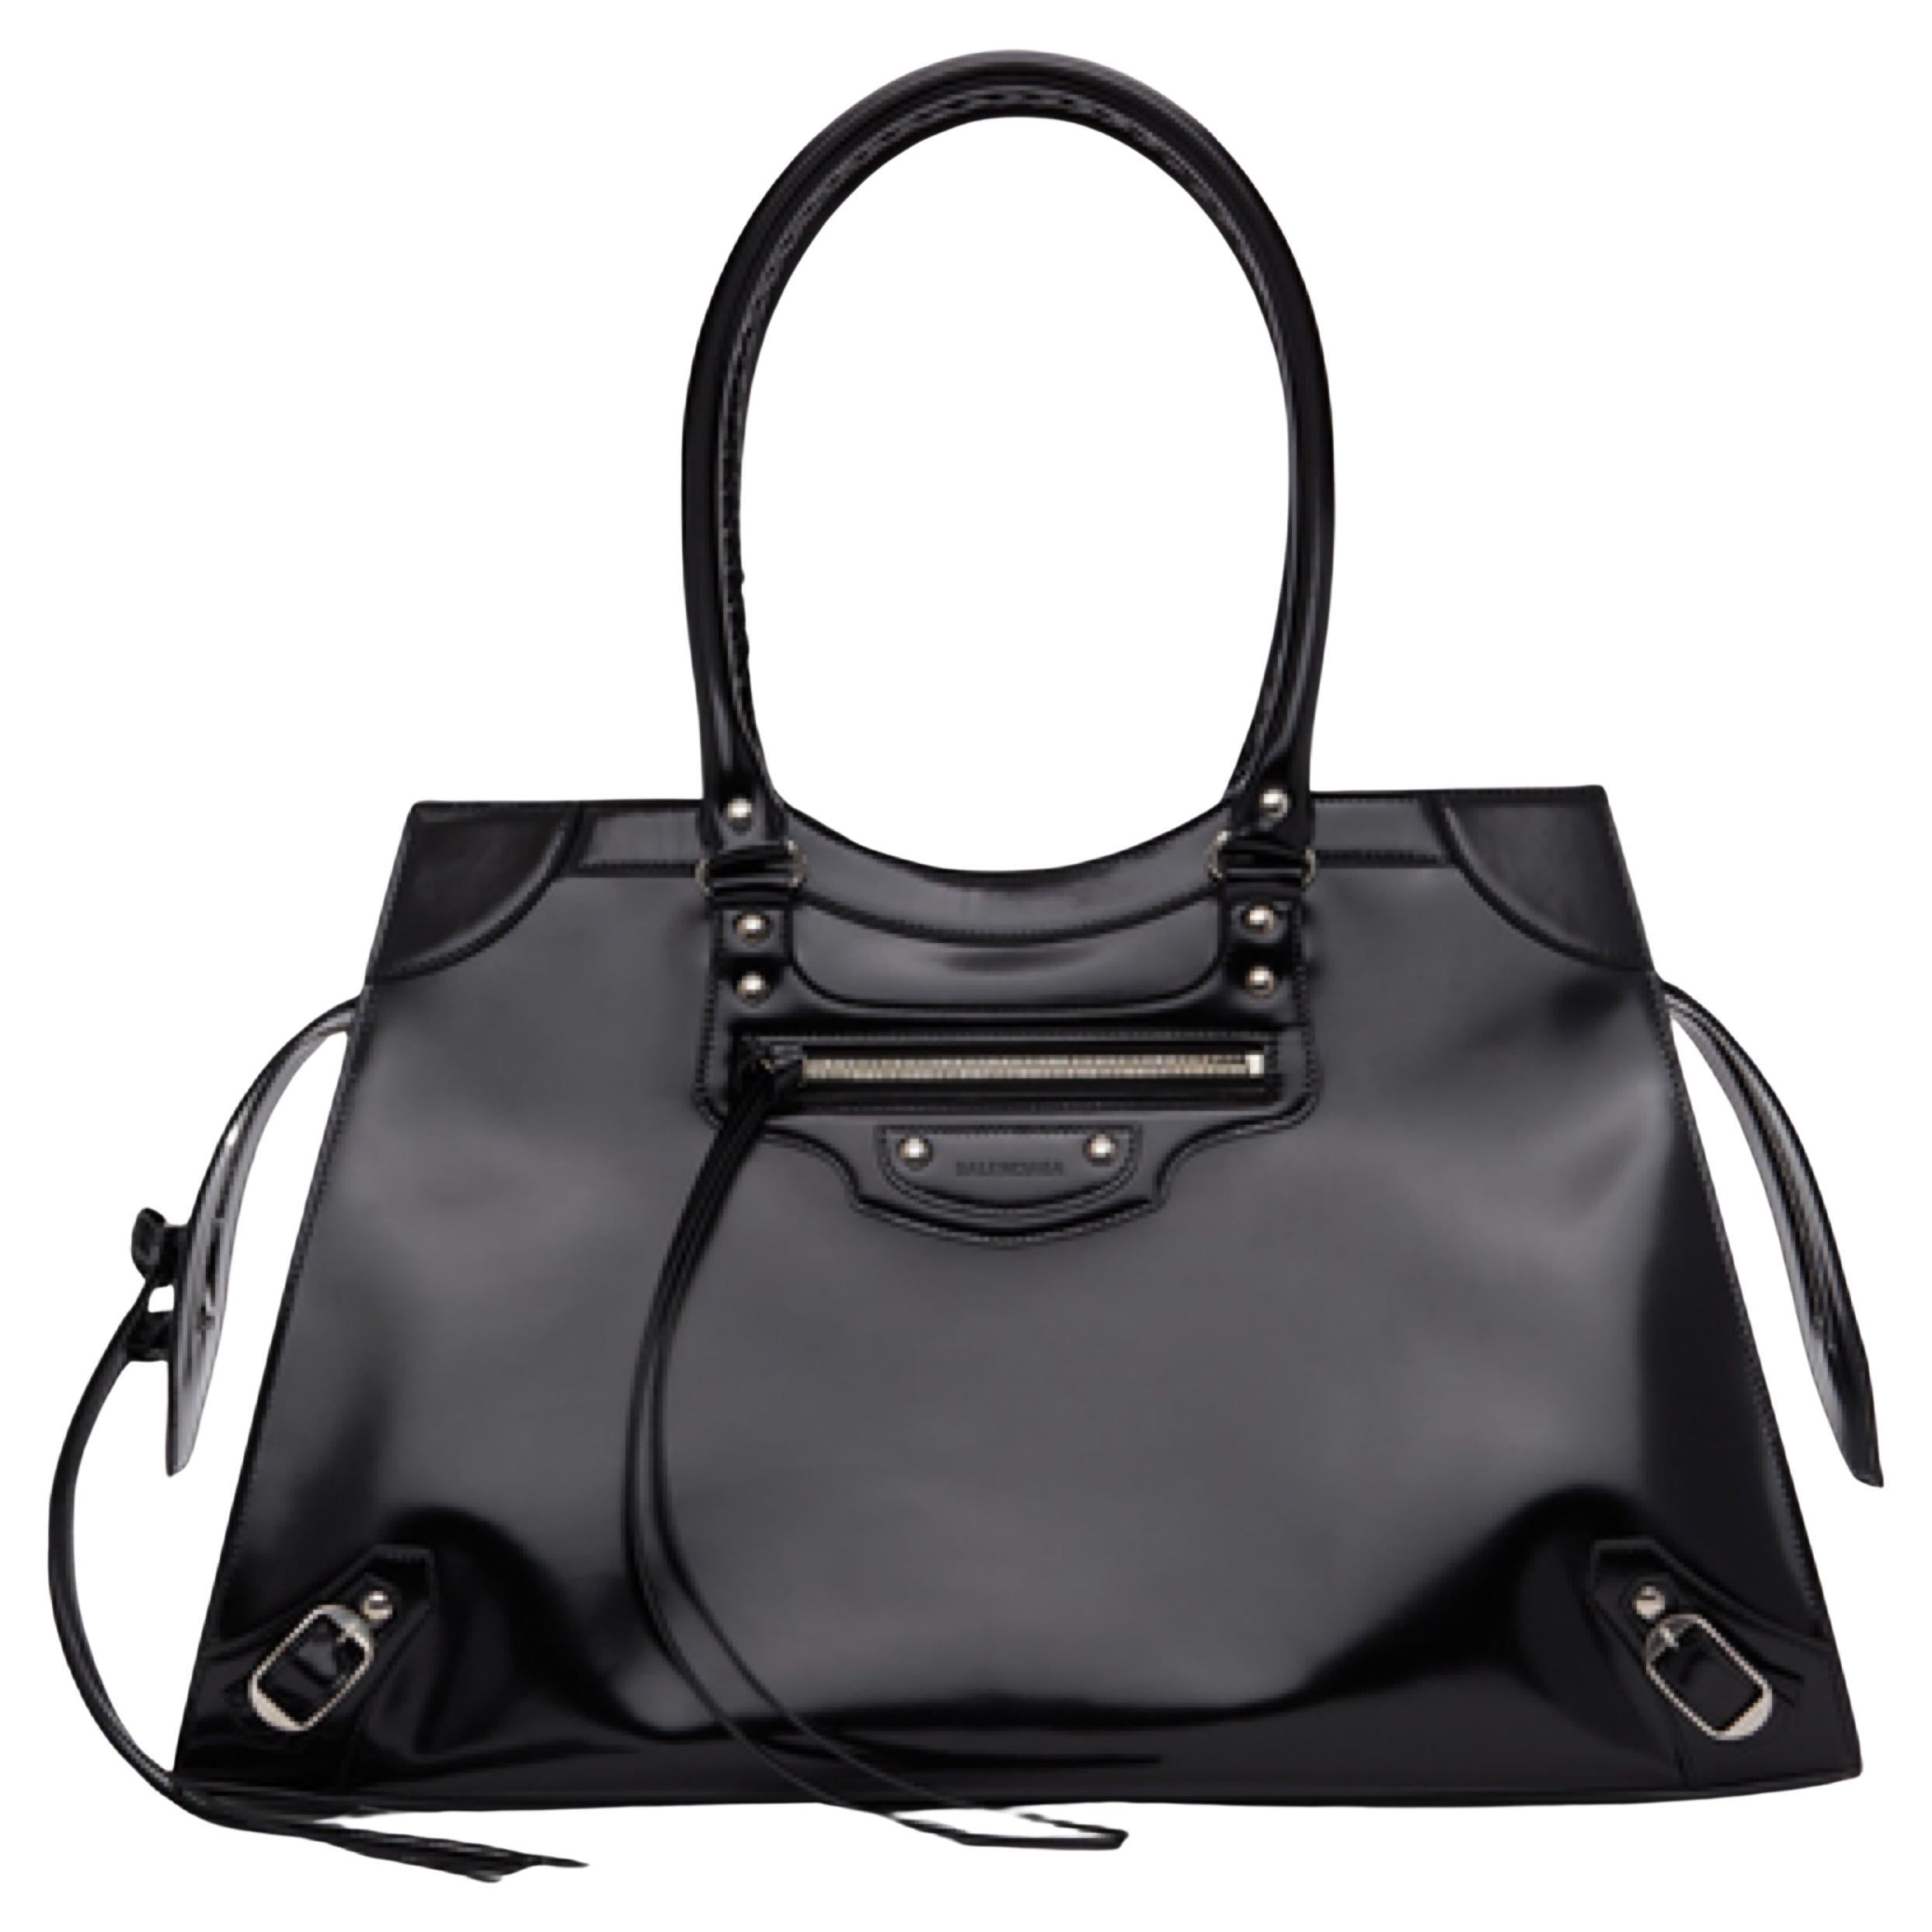 NEW Balenciaga Black Large Neo Classic City Leather Shoulder Bag For Sale